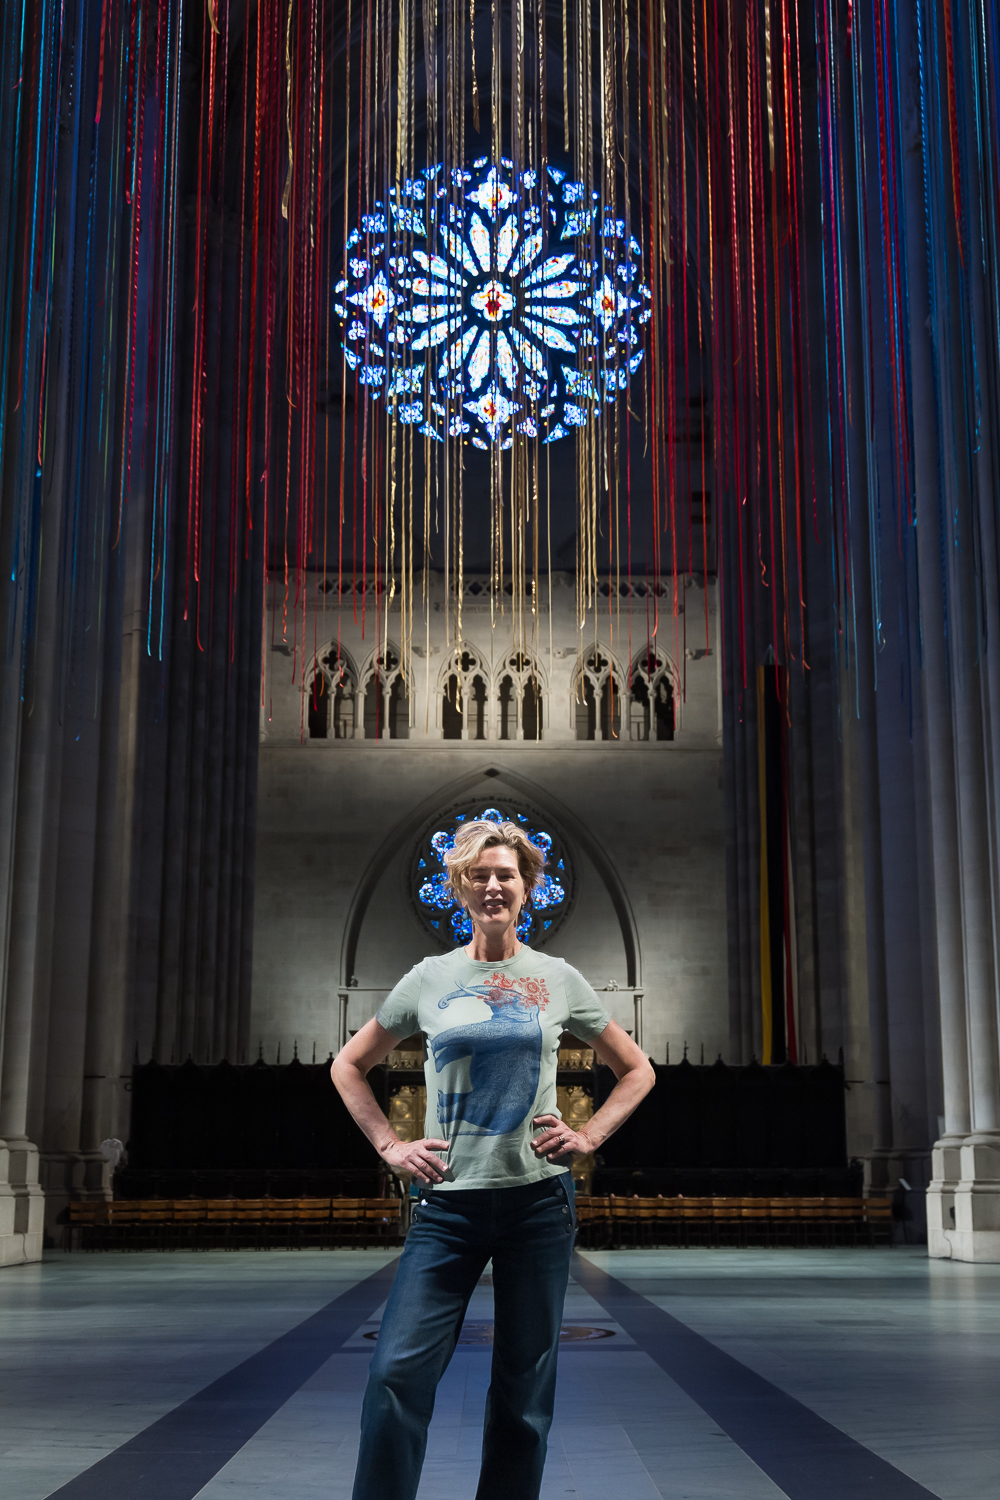 Cathedral of St. John the Divine Lights Up Rainbow Columns for Pride Month